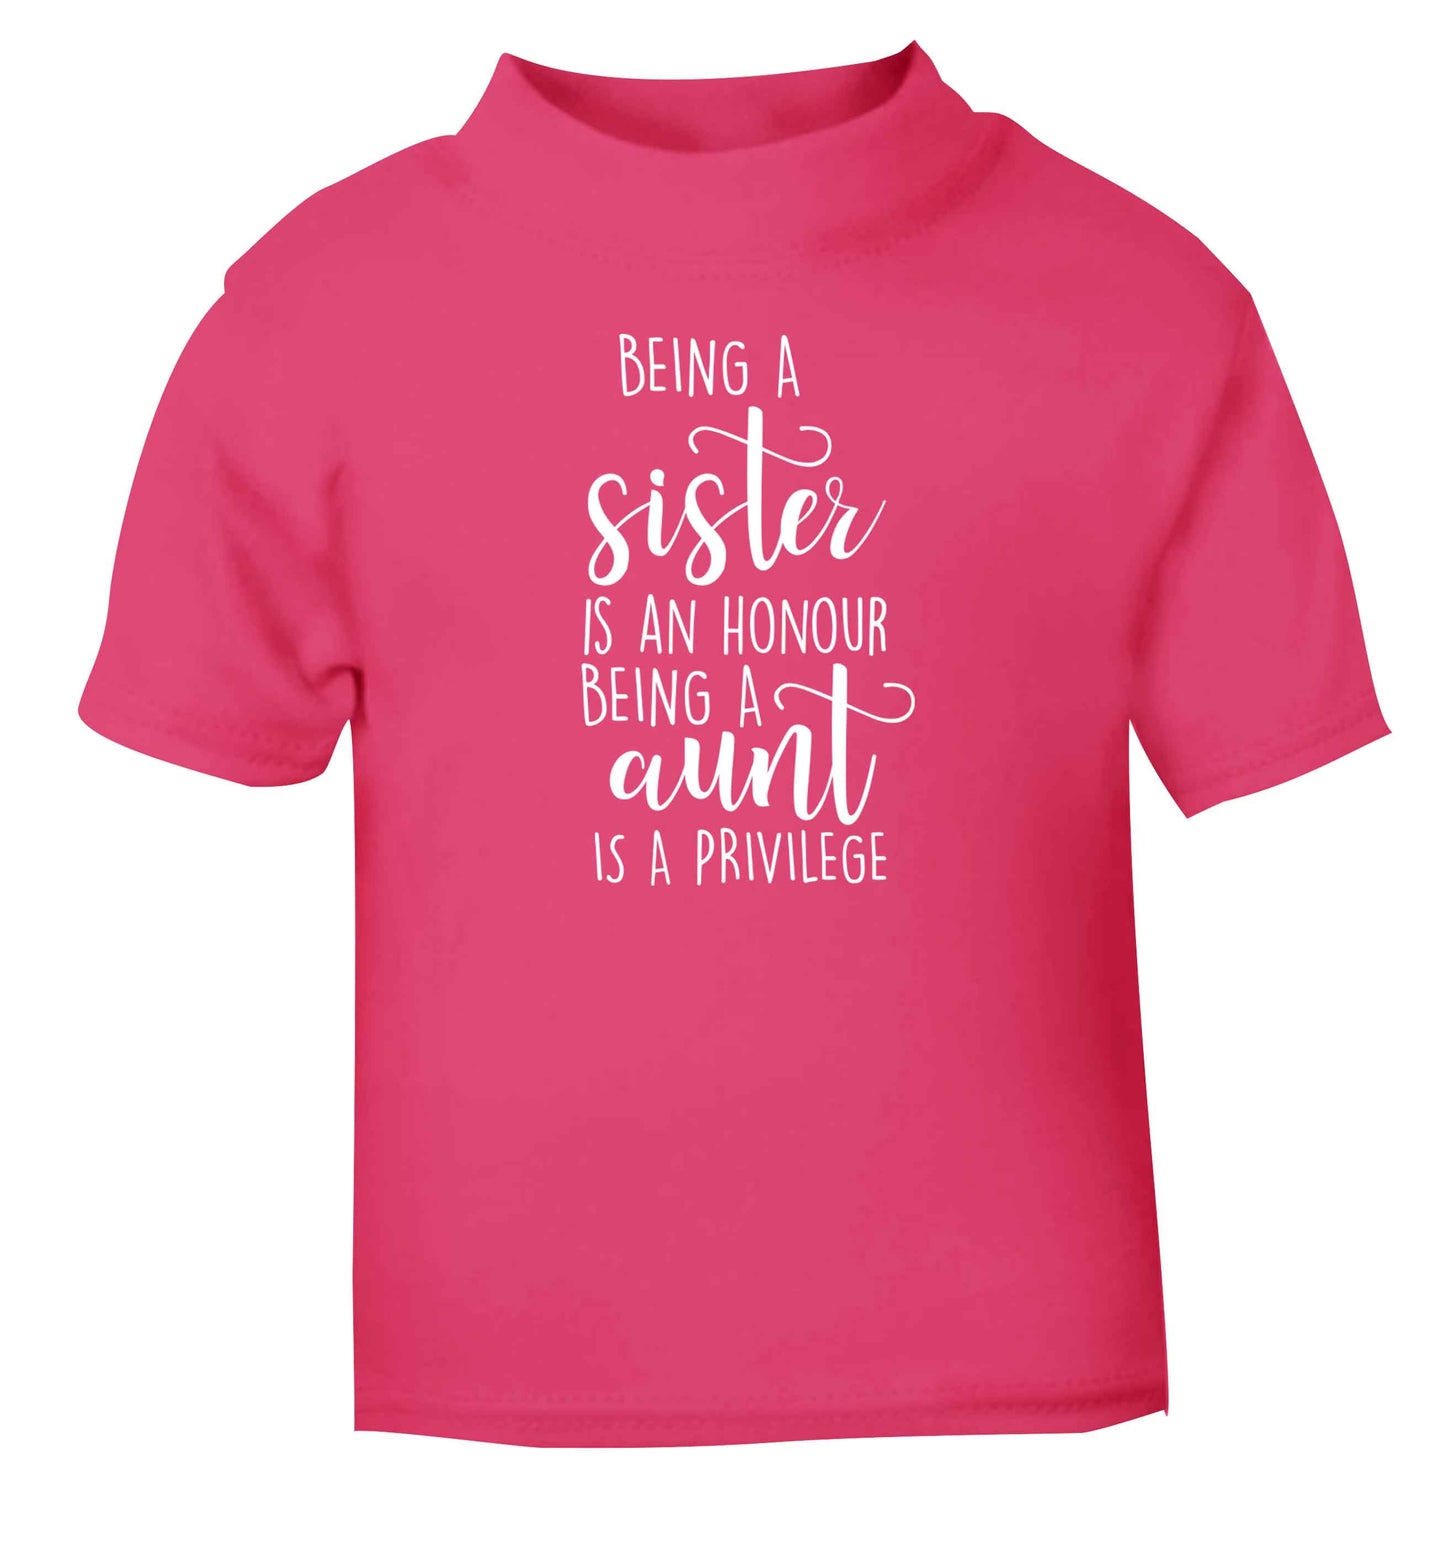 Being a sister is an honour being an auntie is a privilege pink Baby Toddler Tshirt 2 Years